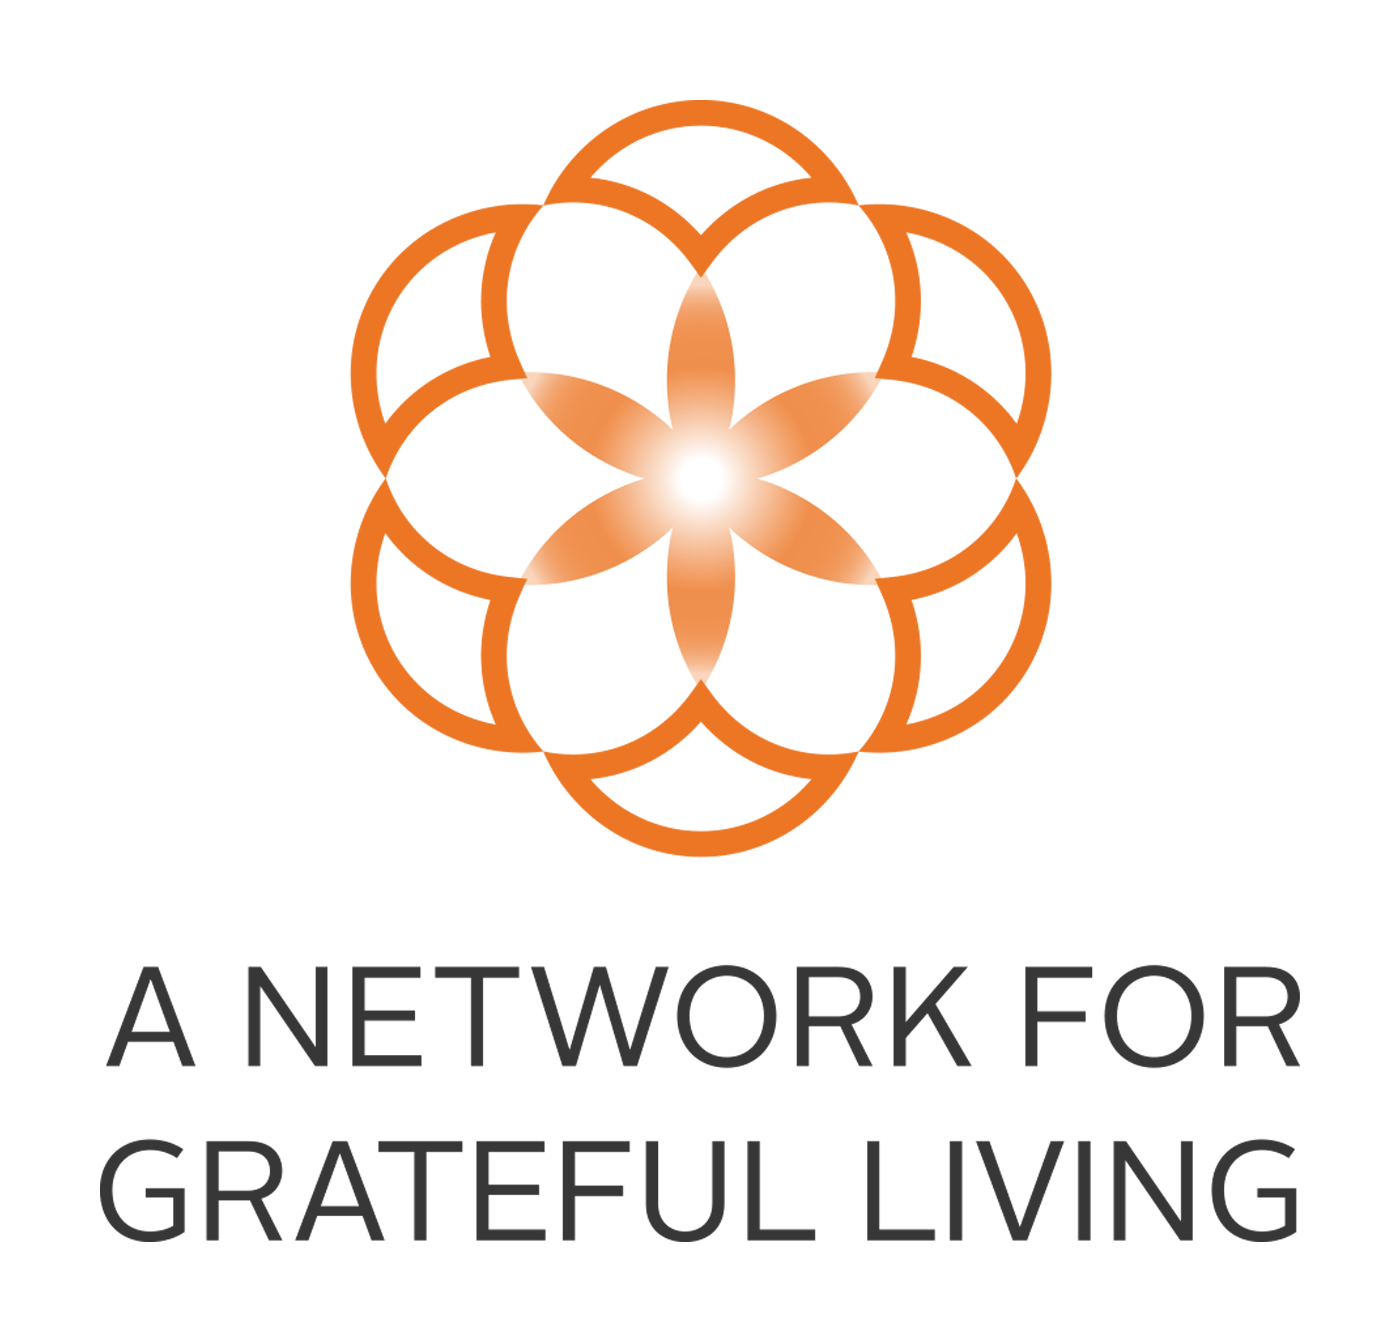 A network for grateful living